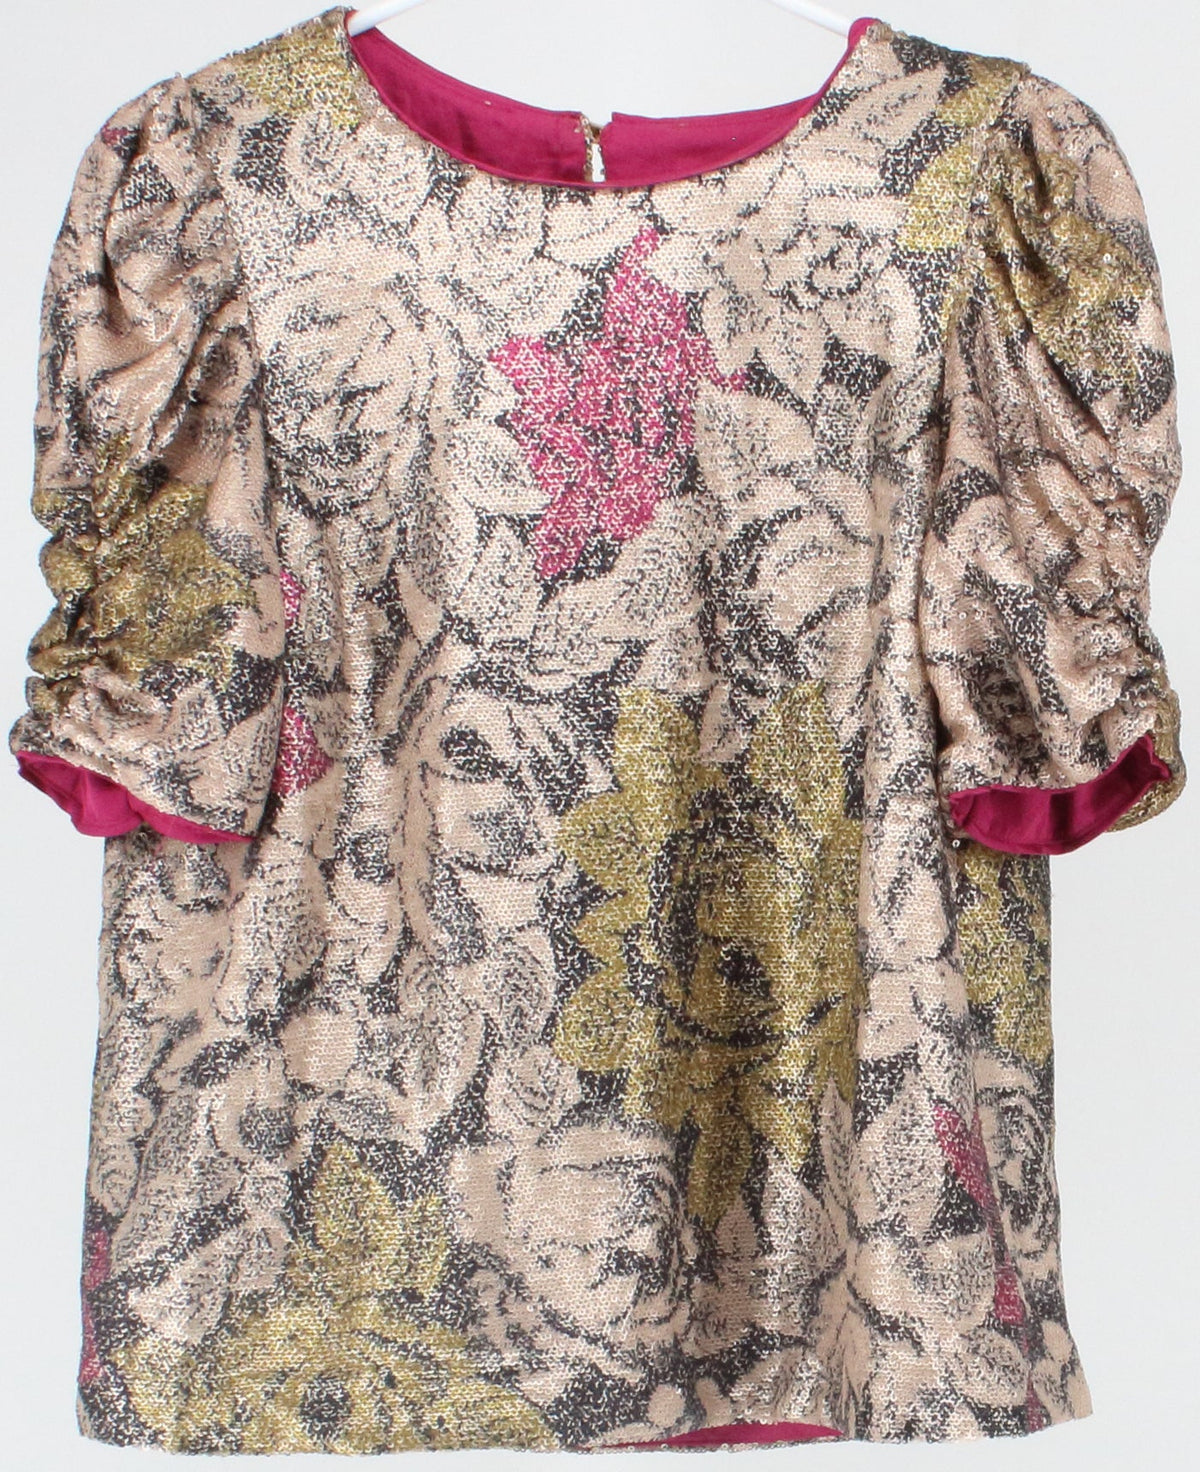 Anthropologie Beige Pink and Gold Sequins Top